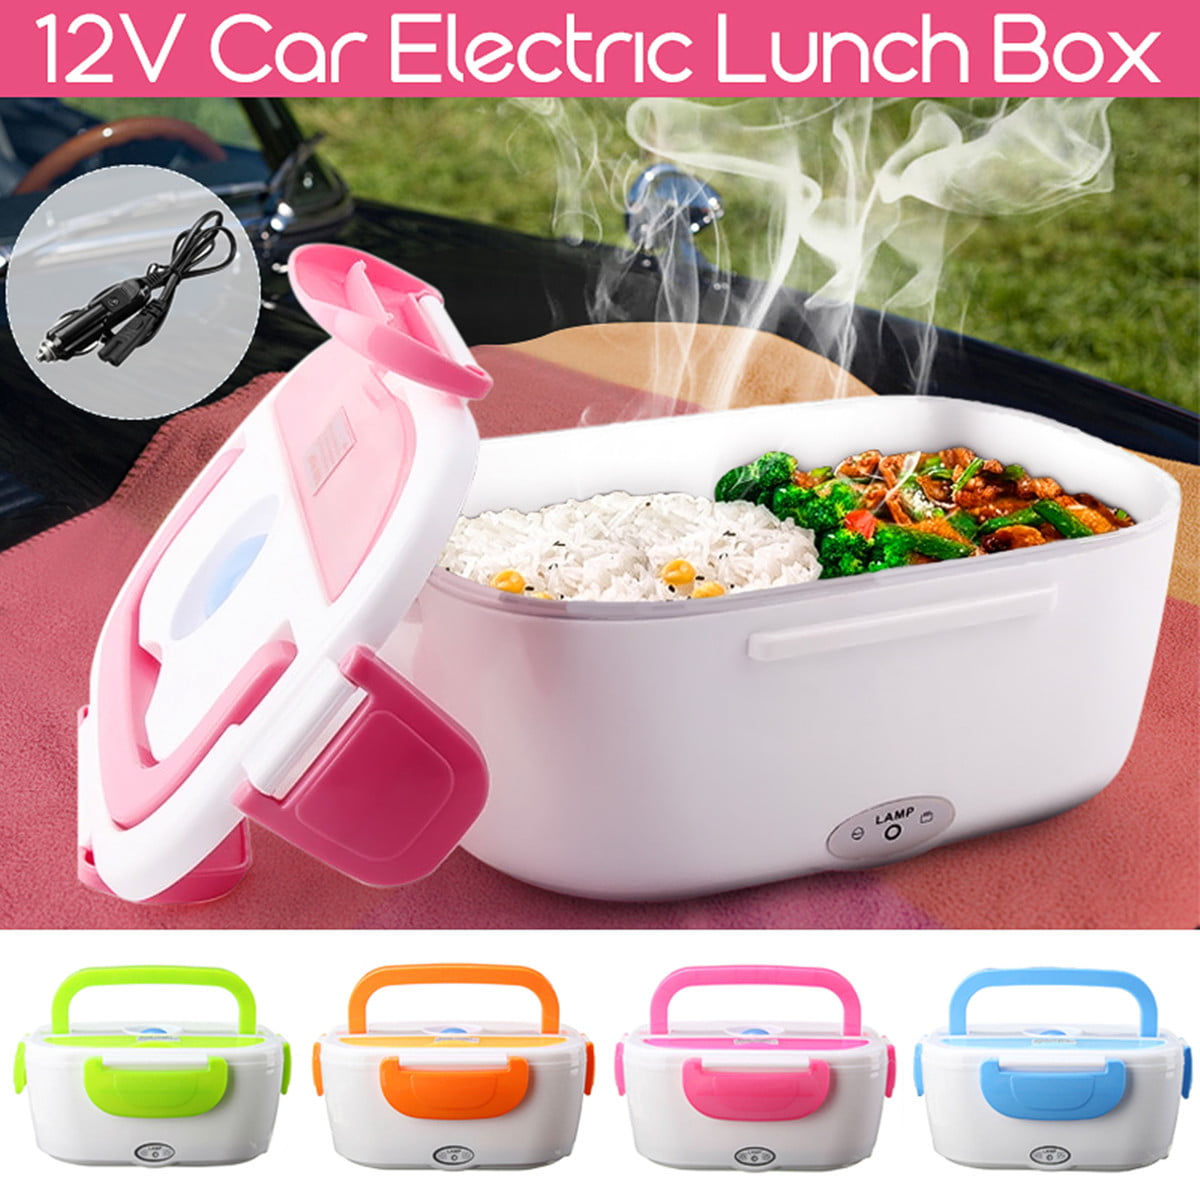 Portable Microwave Stove Oven Lunch Box Precooked Meals Car Plug In Xmas Gift 